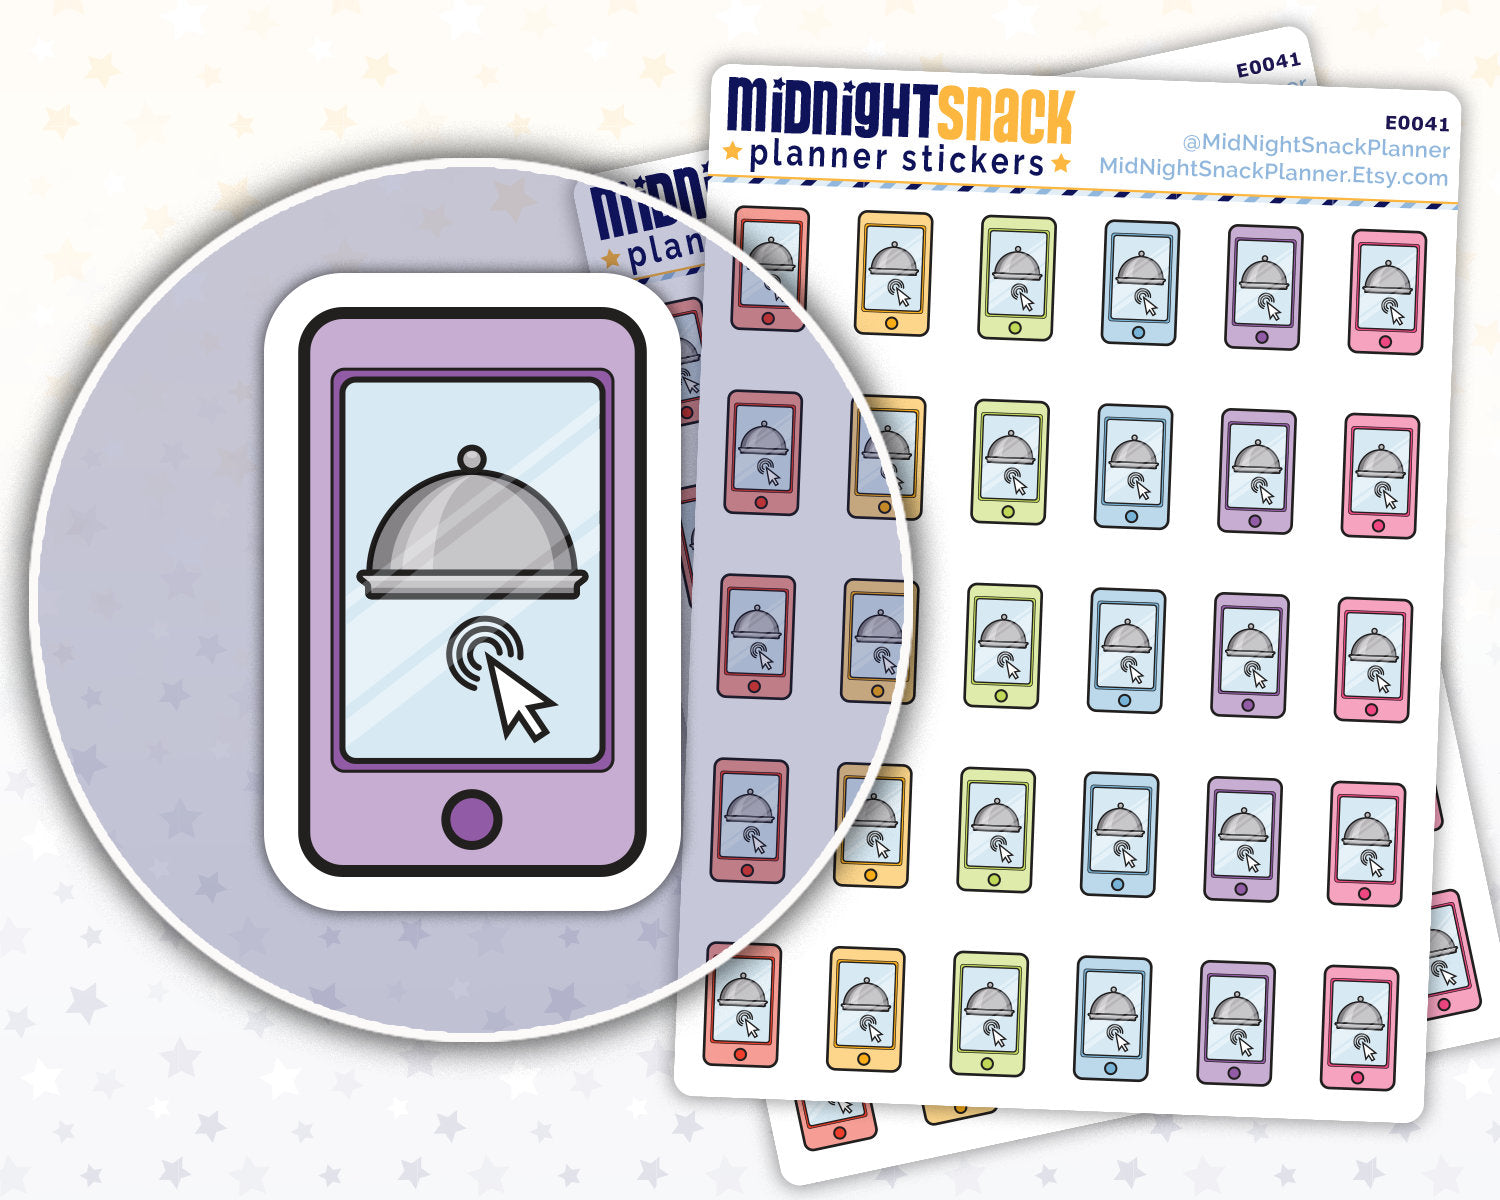 Order Food Online Icon: Food Delivery Planner Stickers Midnight Snack Planner